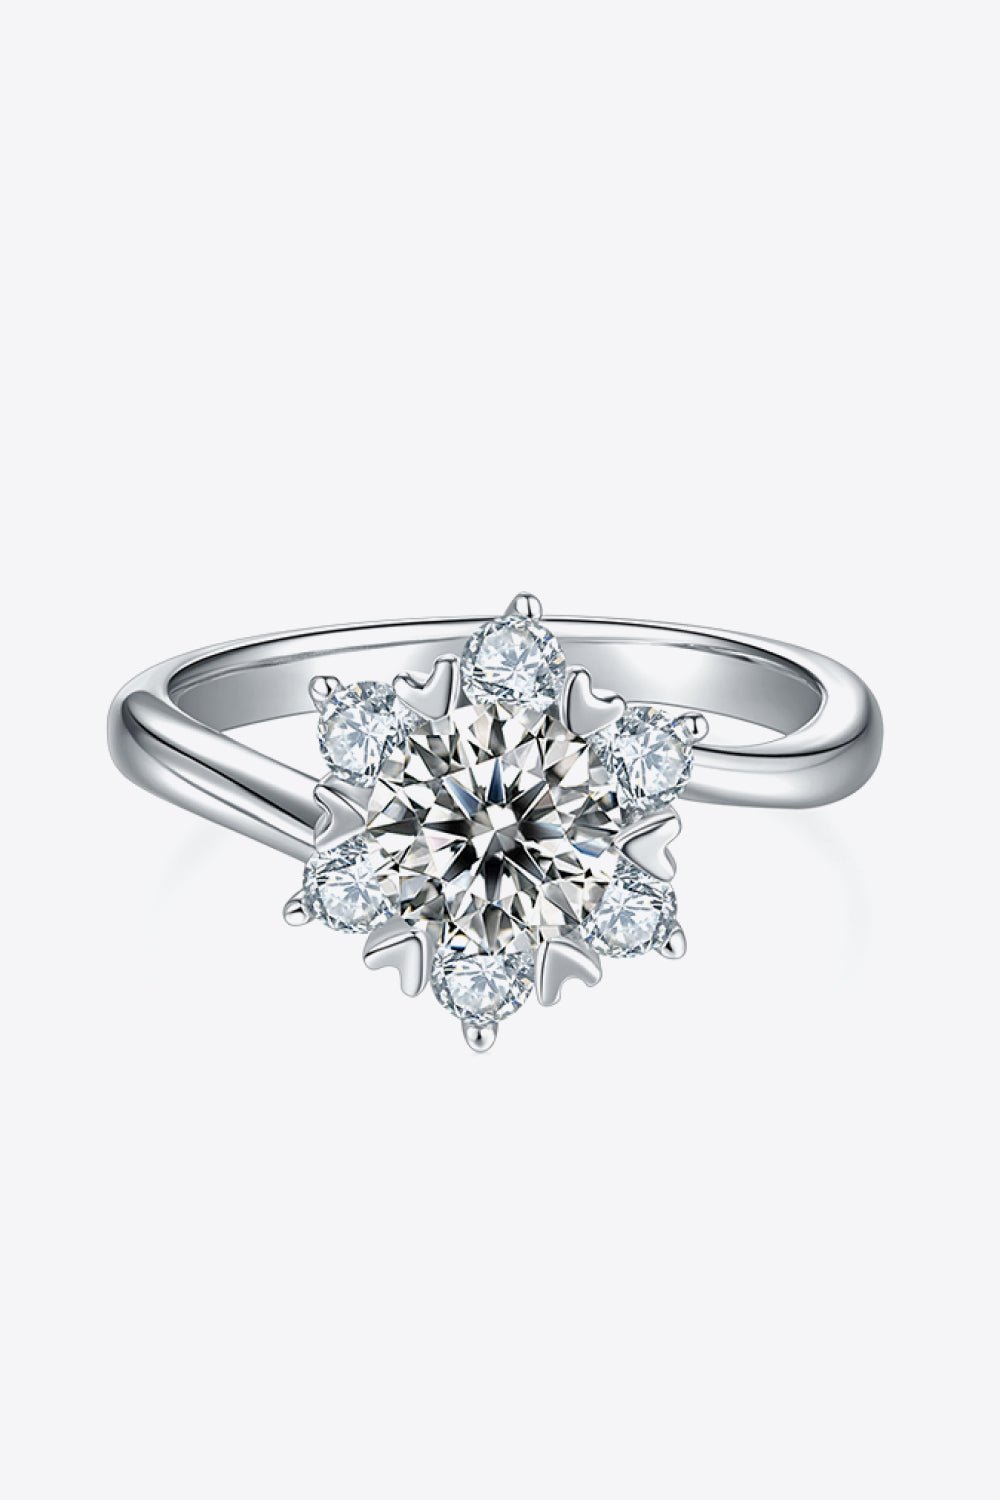 1 Carat Moissanite 925 Sterling Silver Cluster Ring - MyriadMart - jewelry